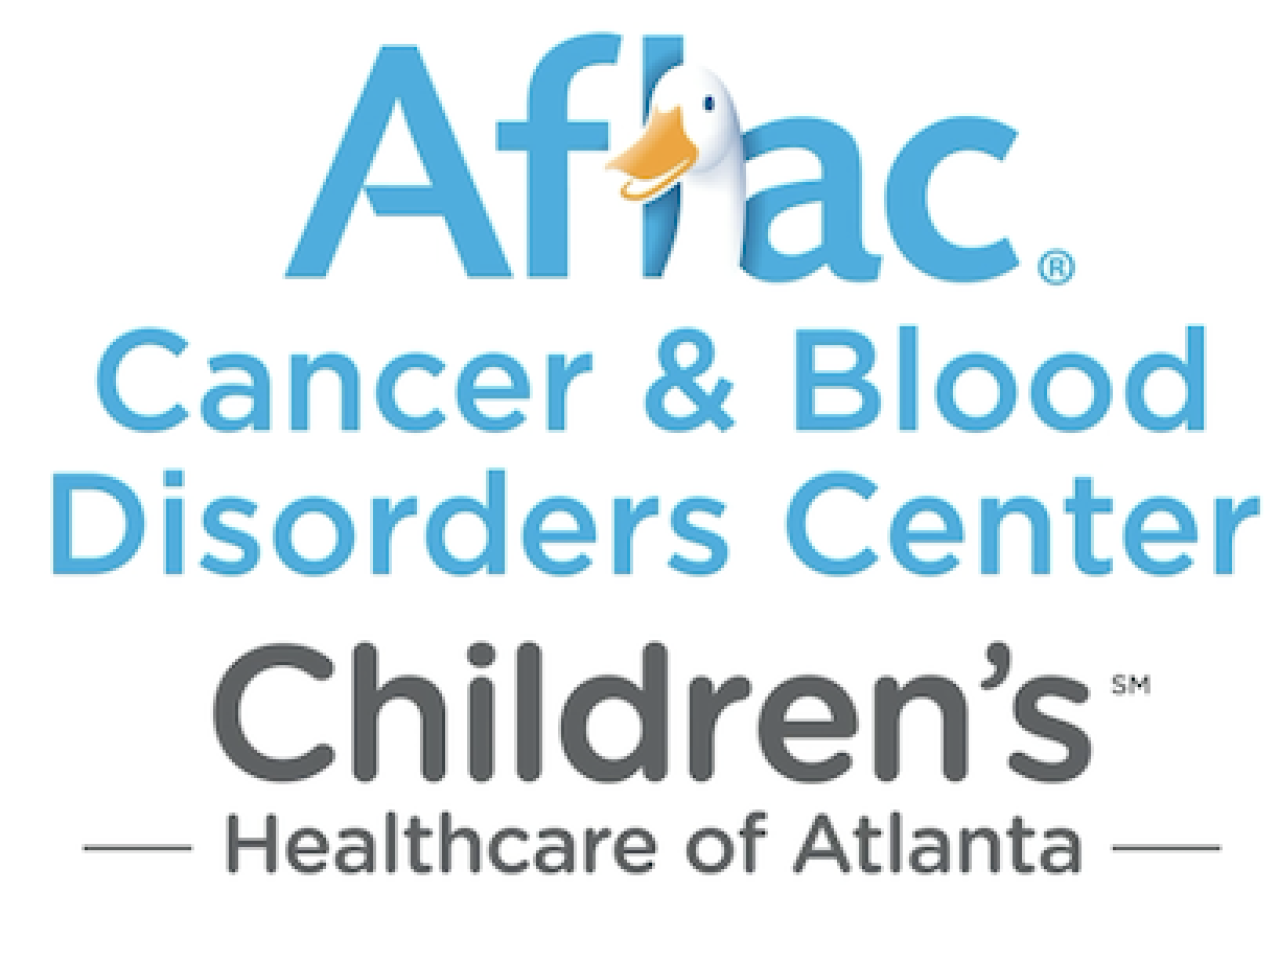 Aflac Cancer & Blood Disorders Center.